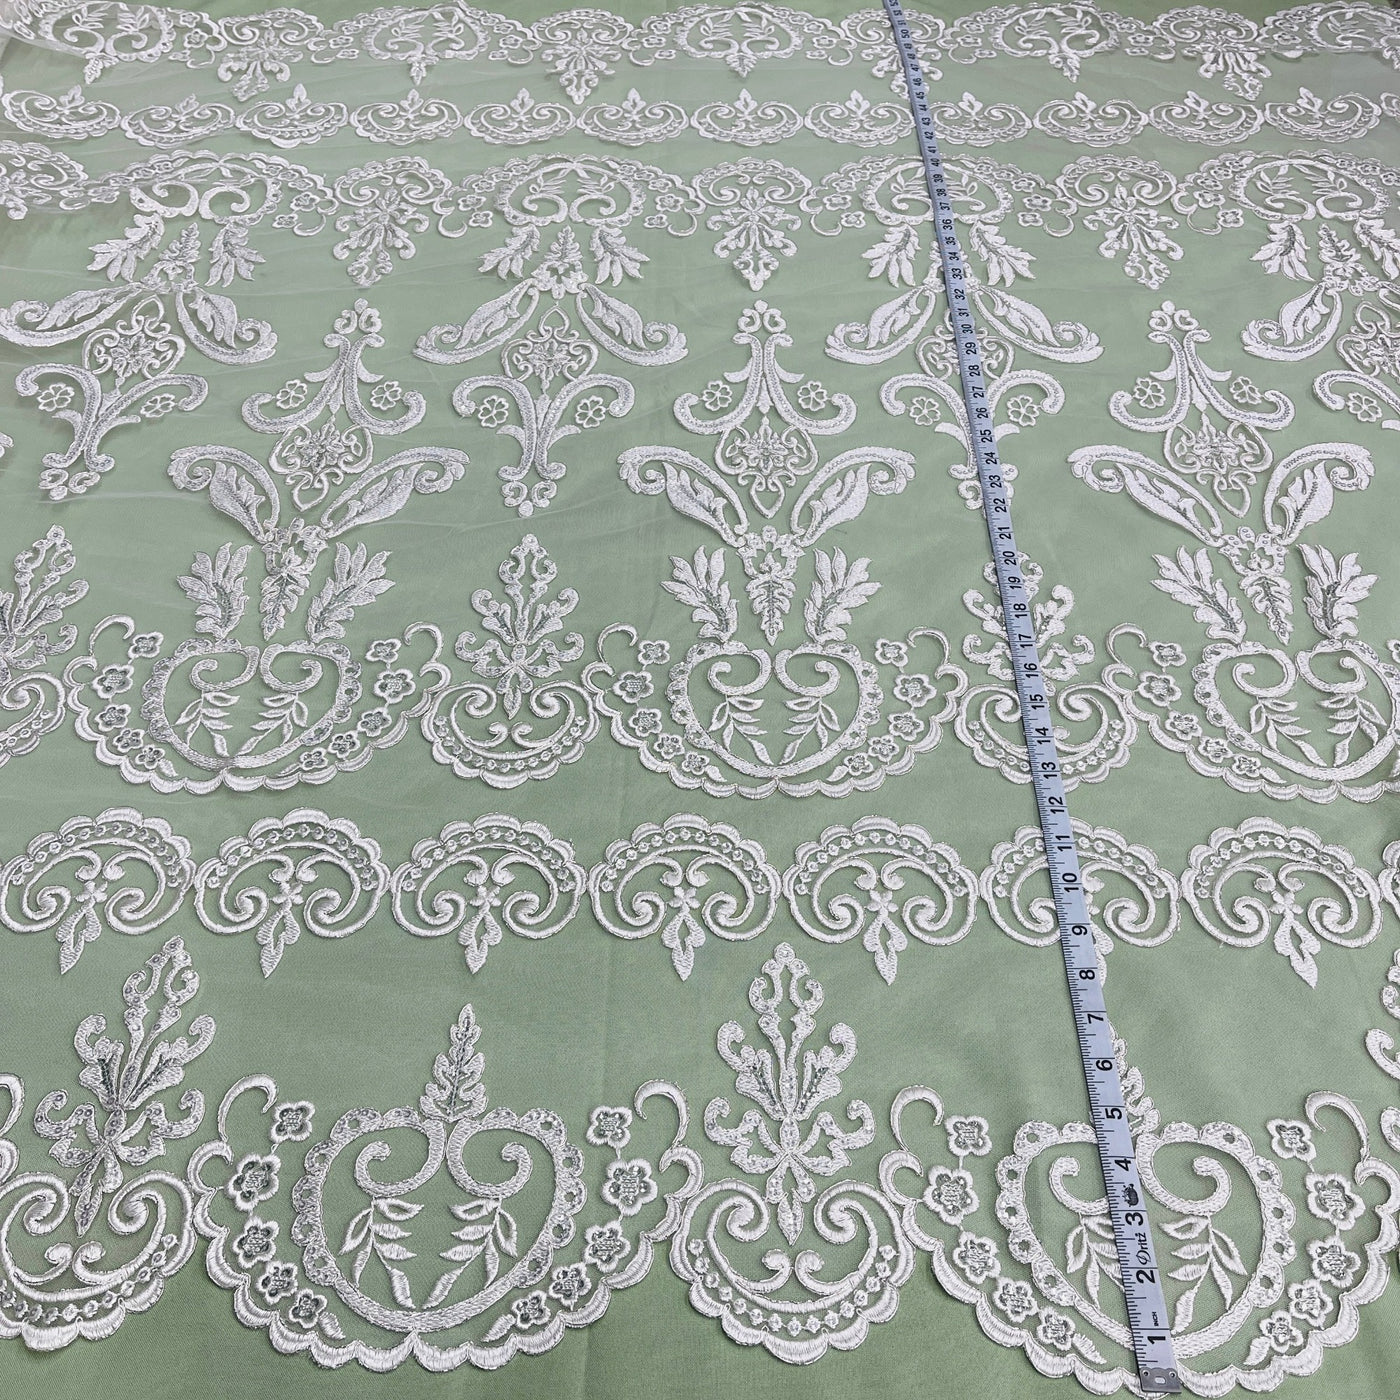 Beaded & Corded Bridal Lace Fabric Embroidered on 100% Polyester Net Mesh | Lace USA - 97068W-SB Ivory with Silver